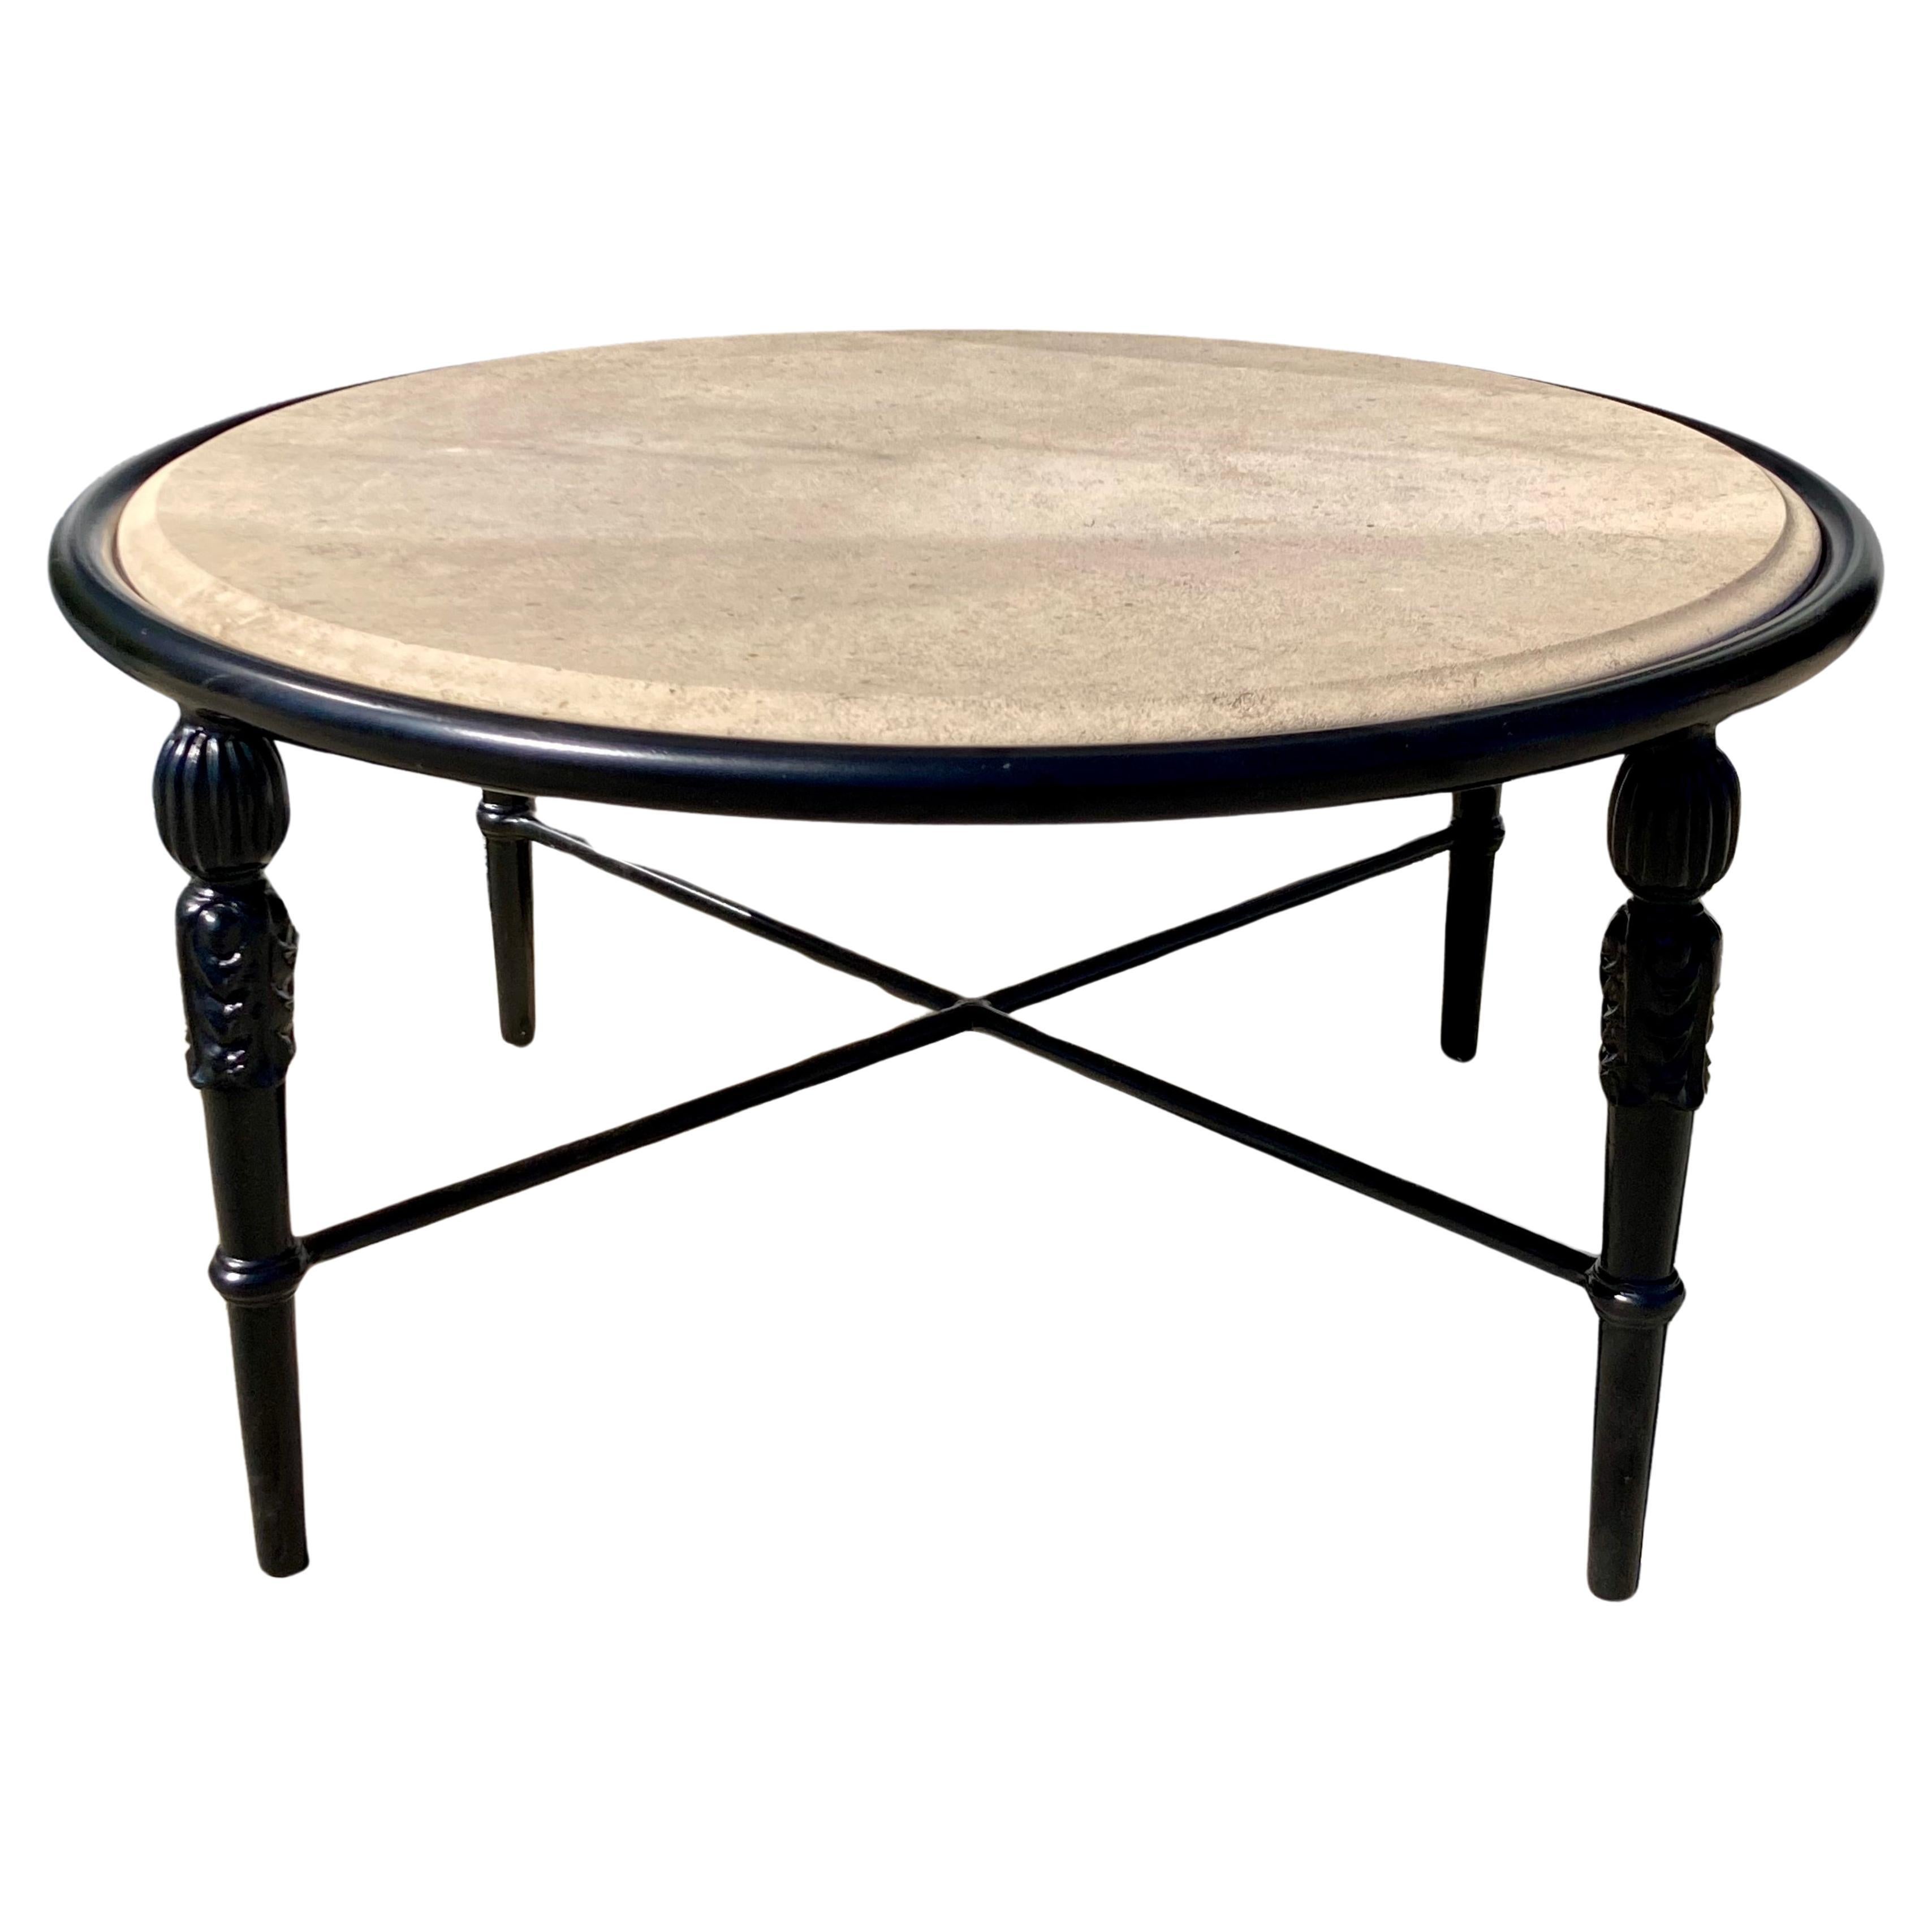 Michael Taylor Montecito Round Patio Coffee Table With Stone Top For Sale